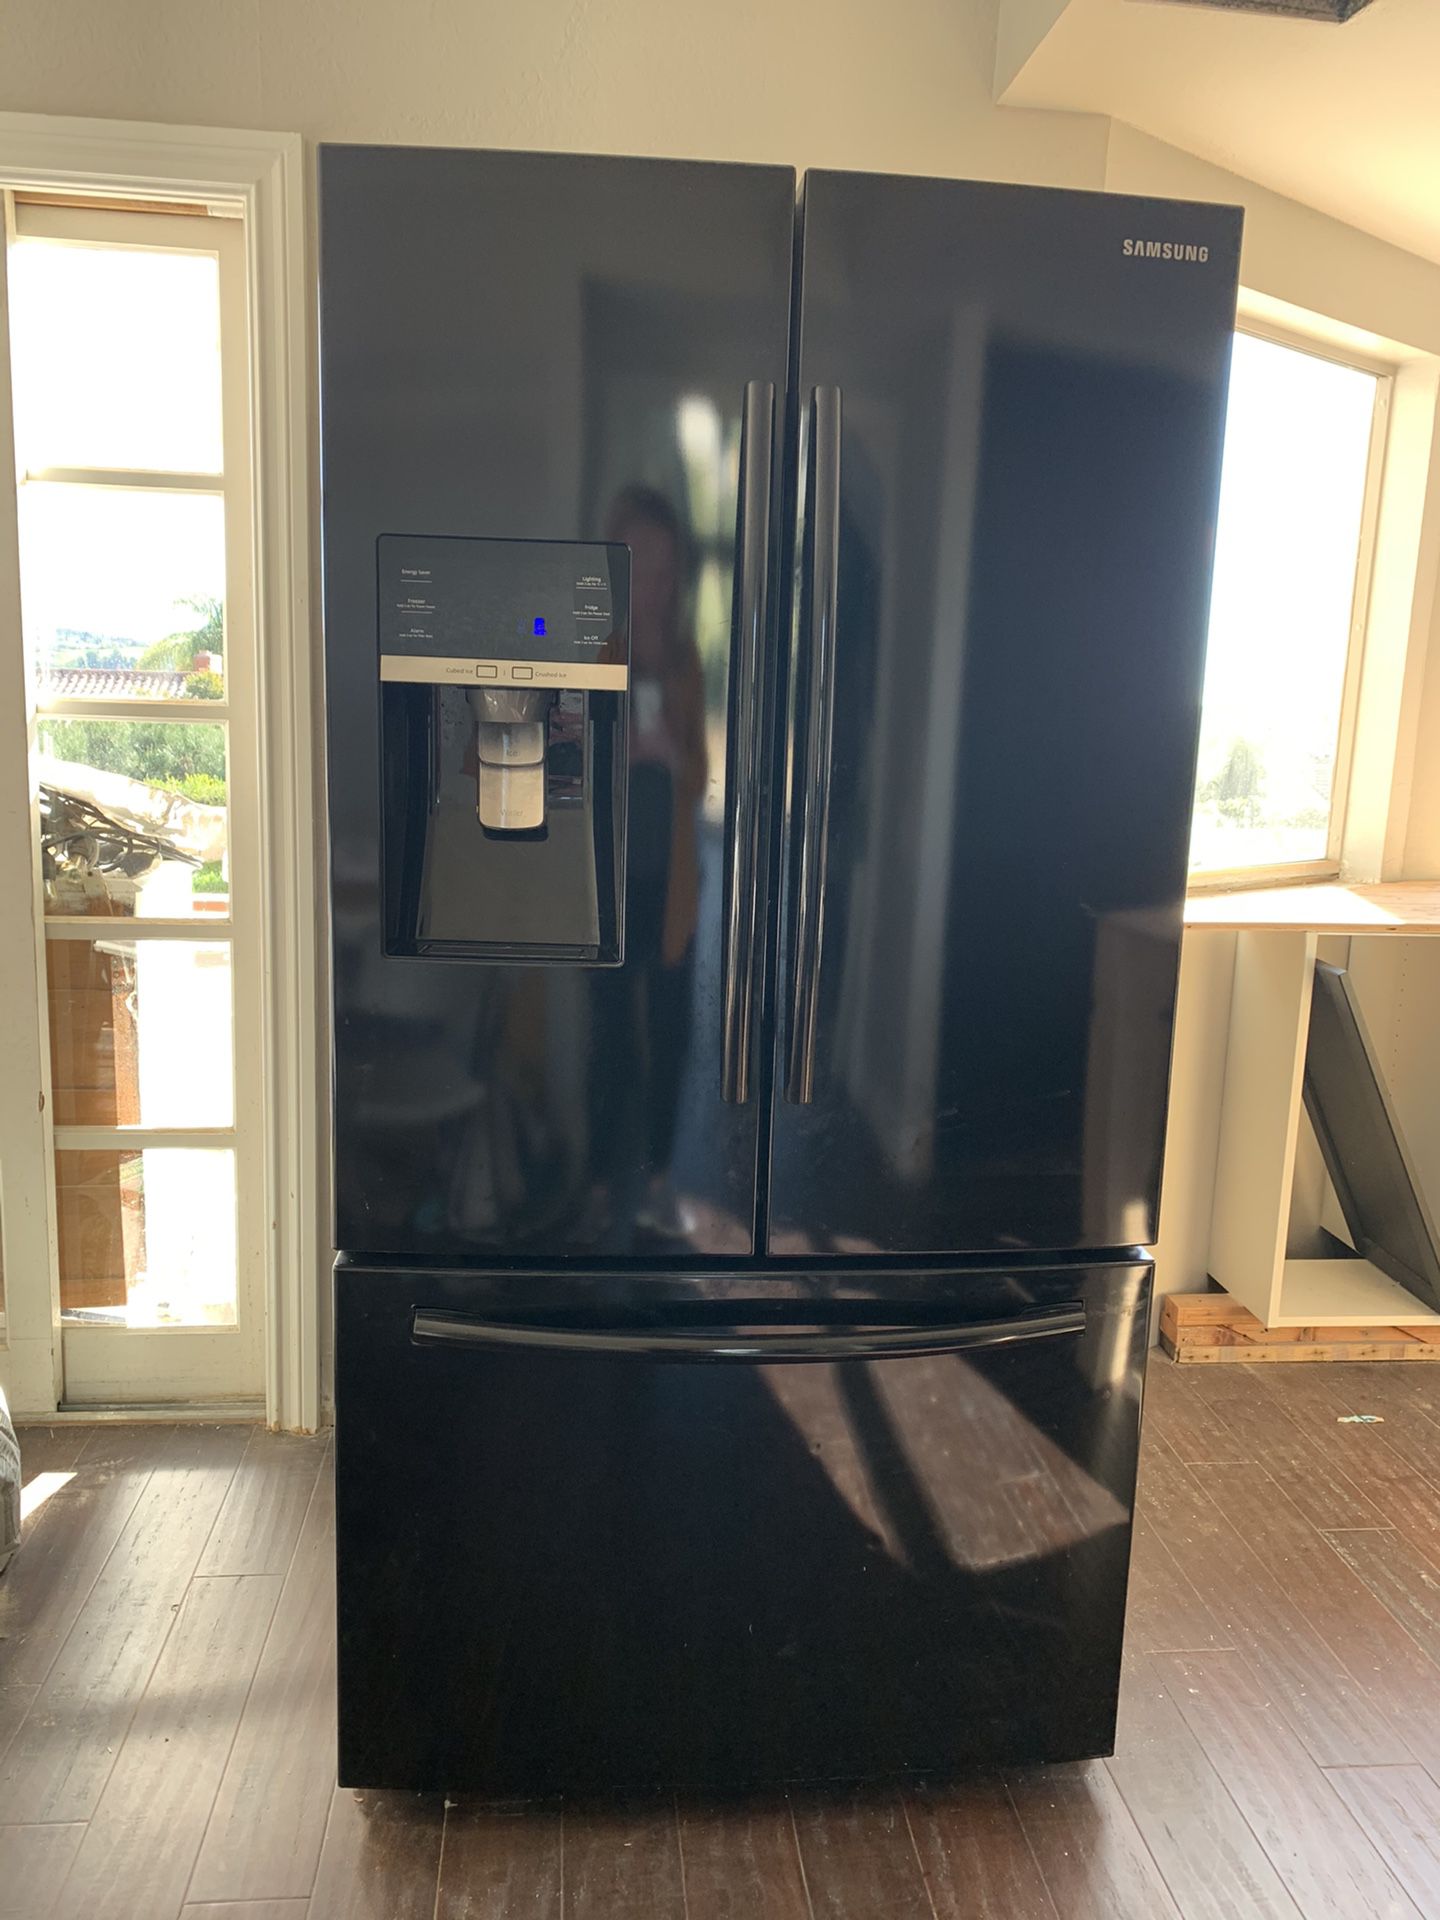 Samsung French Door Refrigerator with Dual Ice Maker